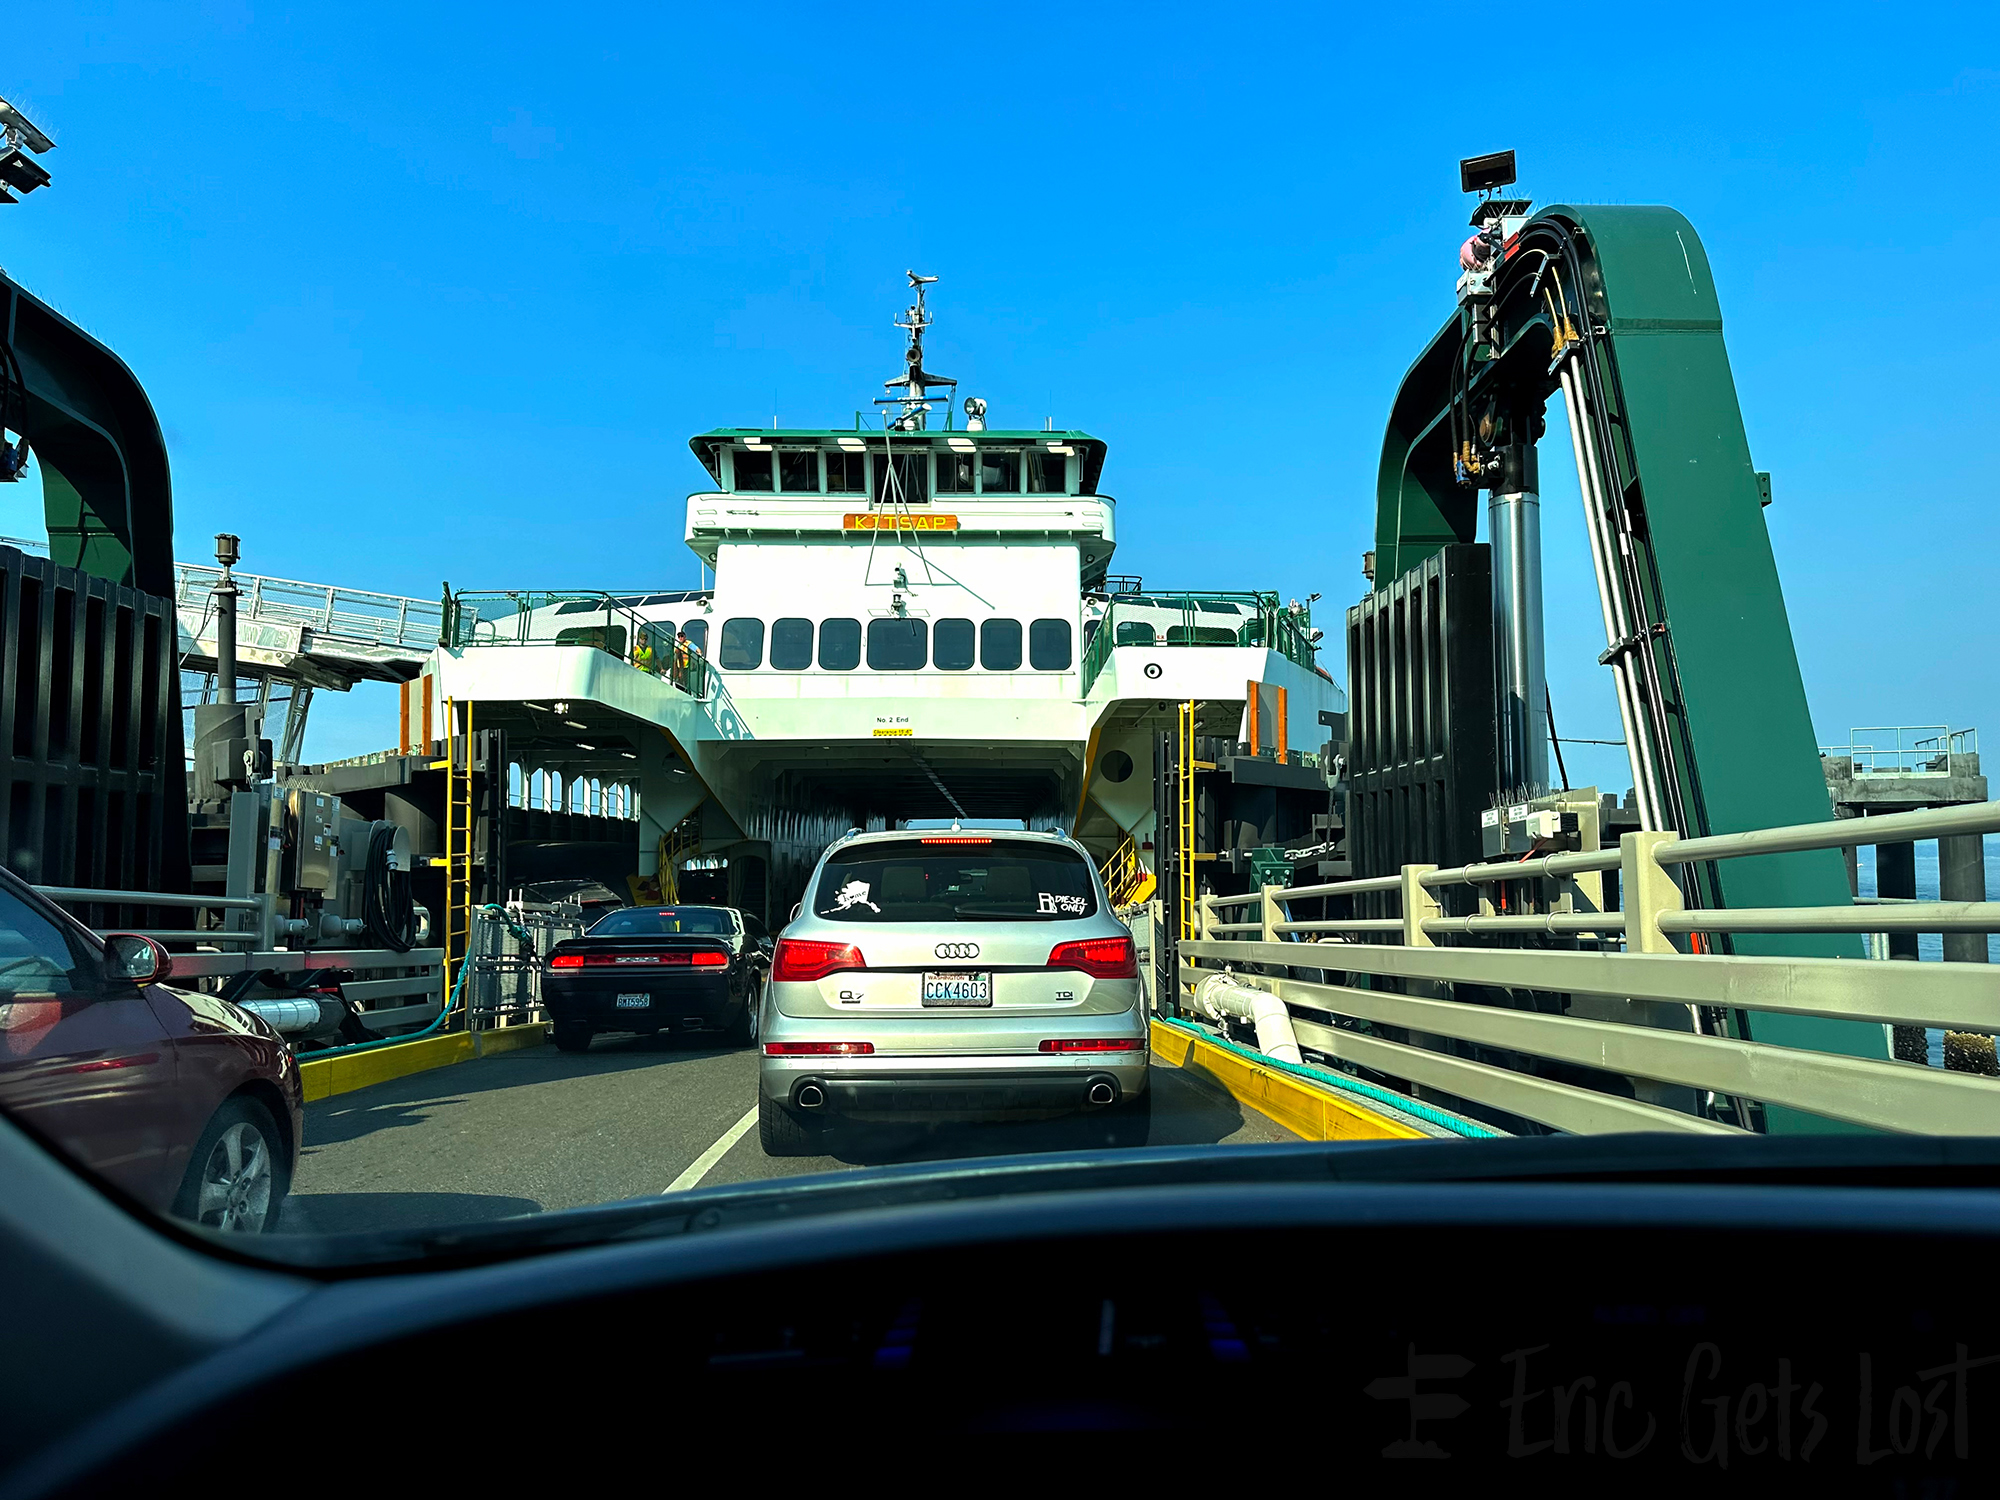 Whidbey Island Ferry